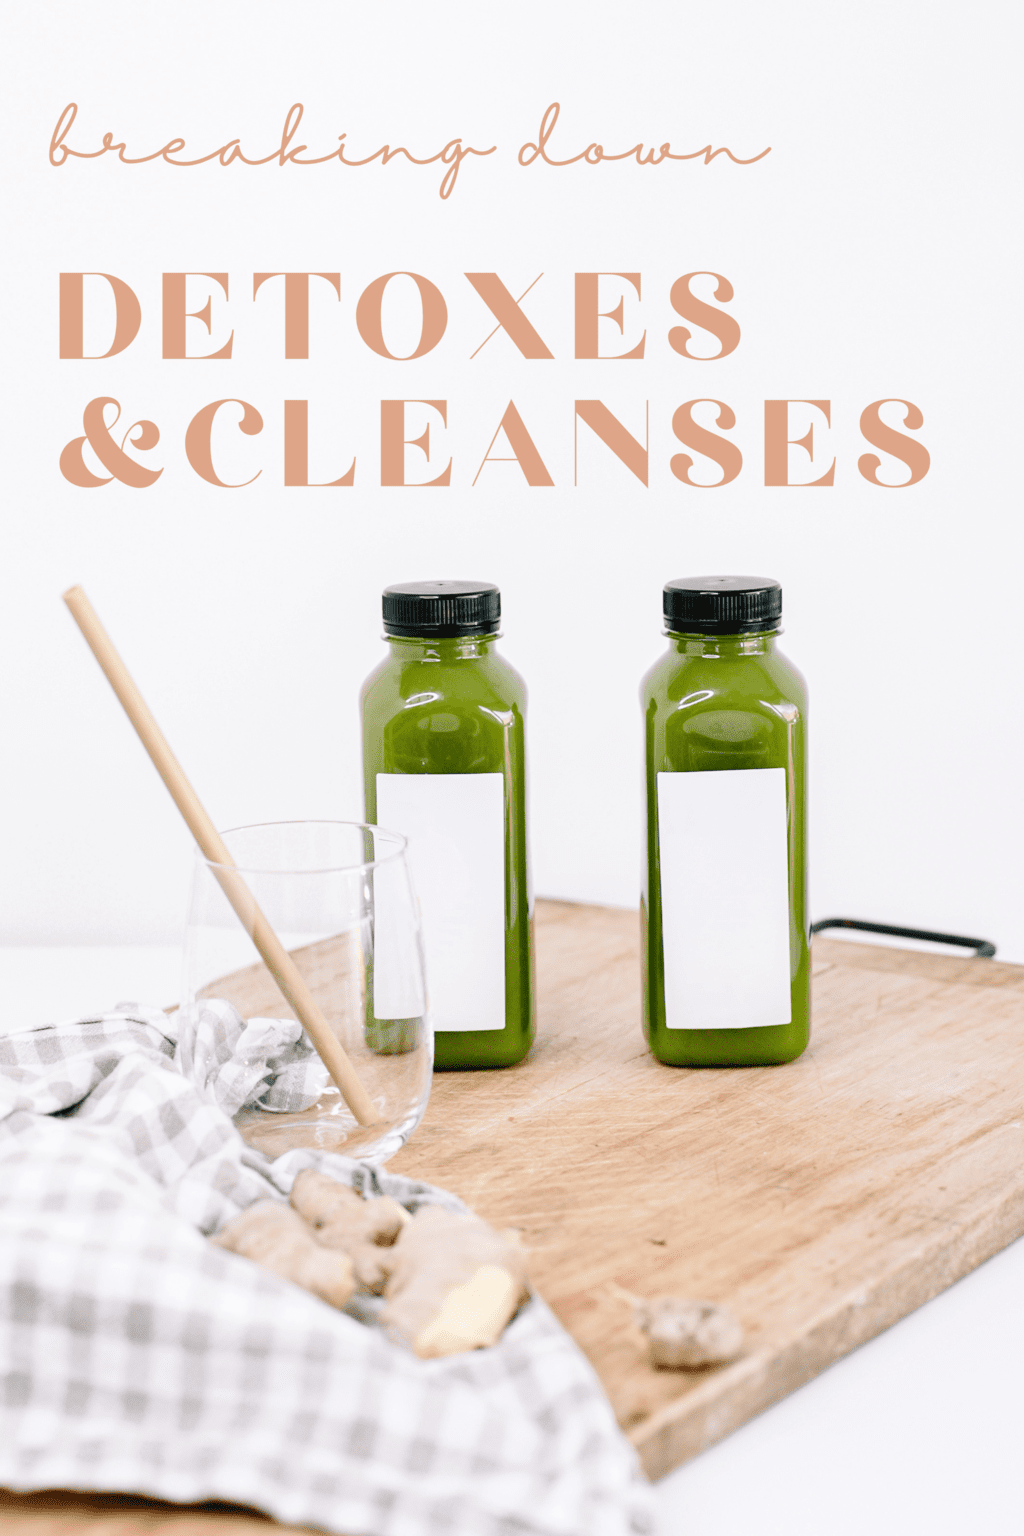 Two bottles of green juice are on a cutting board with text "breaking down detoxes & cleanses" above it